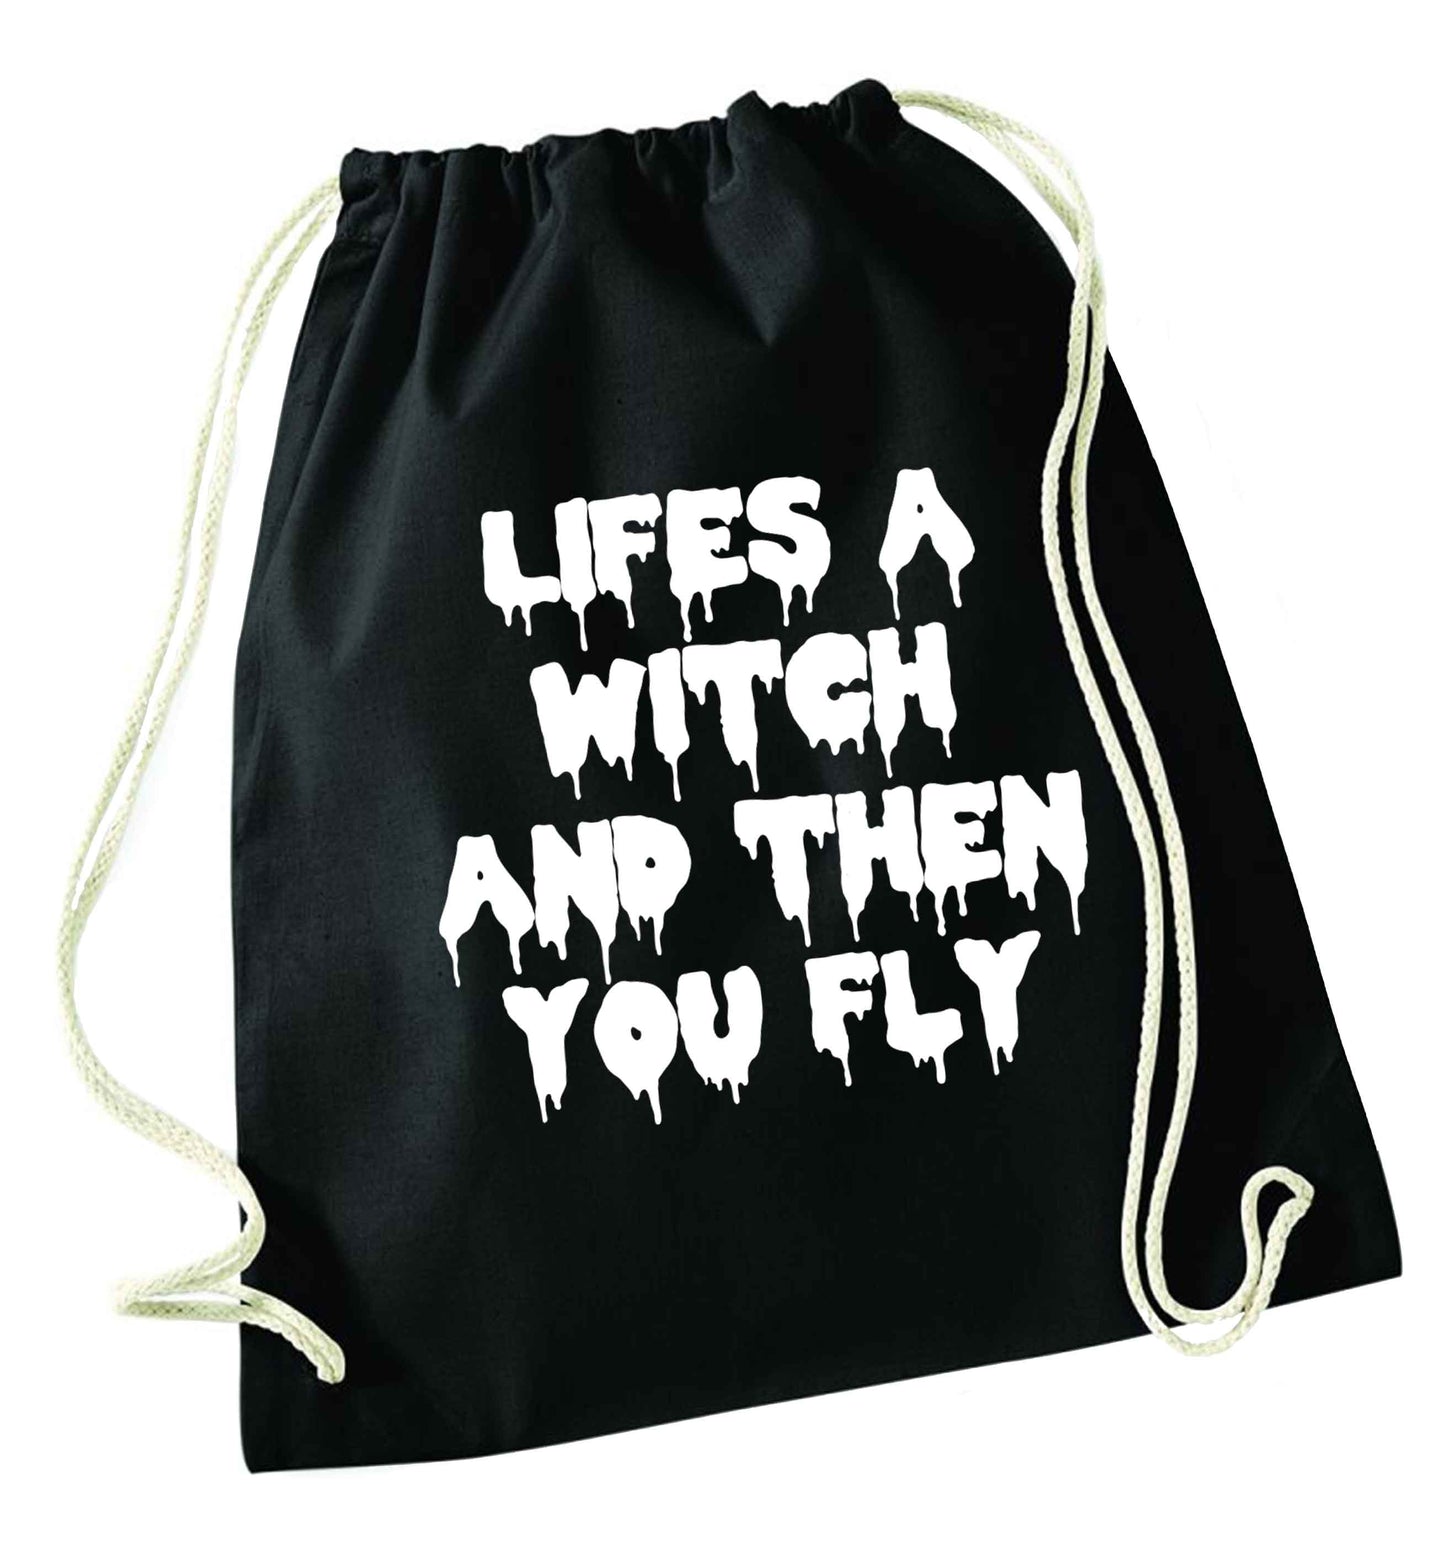 Life's a witch and then you fly black drawstring bag